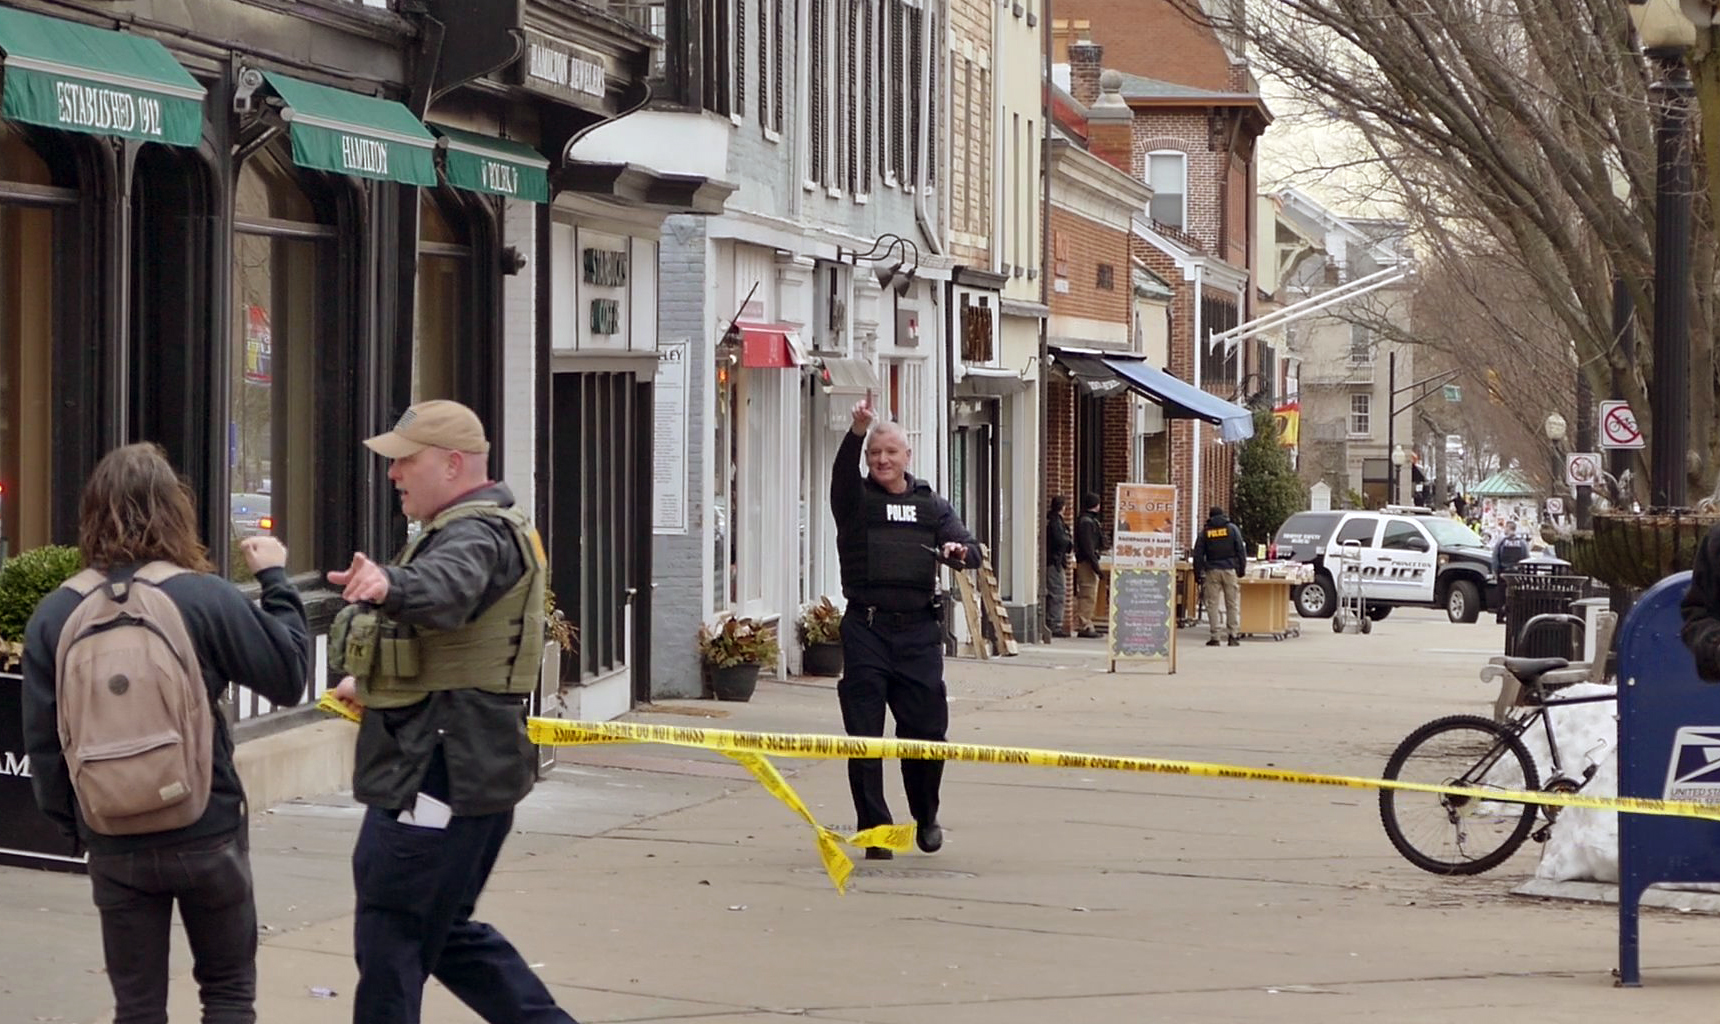 PHOTO: Police surrounded a restaurant across the street from Princeton University's campus during a stand off with an armed man, on Tuesday, March 20, 2018 in Princeton, N.J.